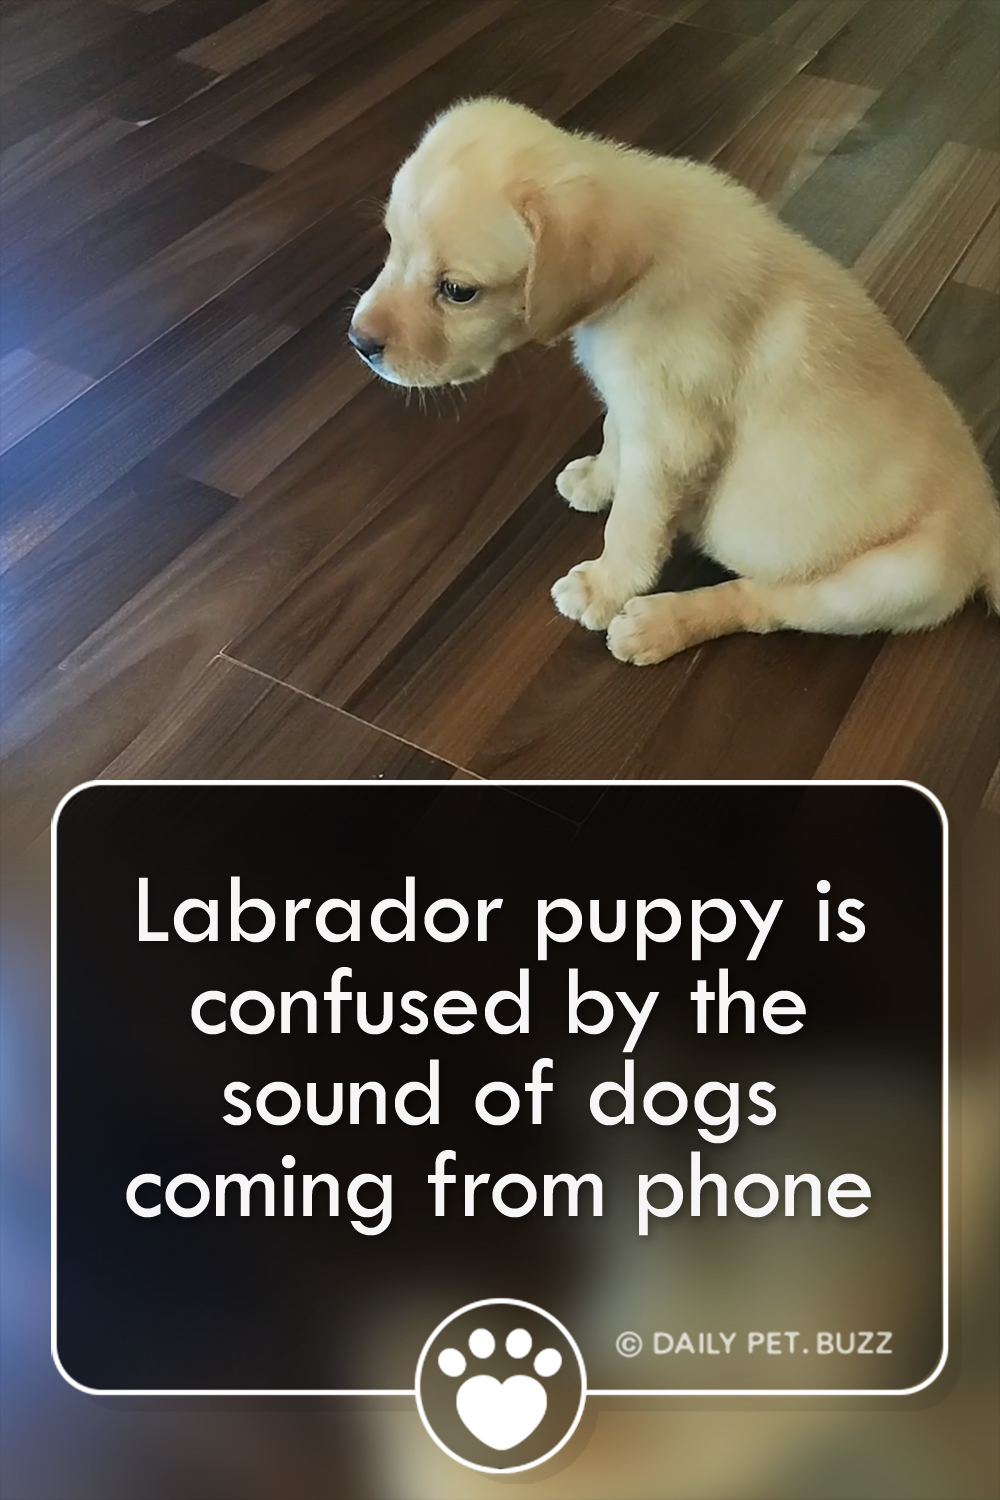 Labrador puppy is confused by the sound of dogs coming from phone